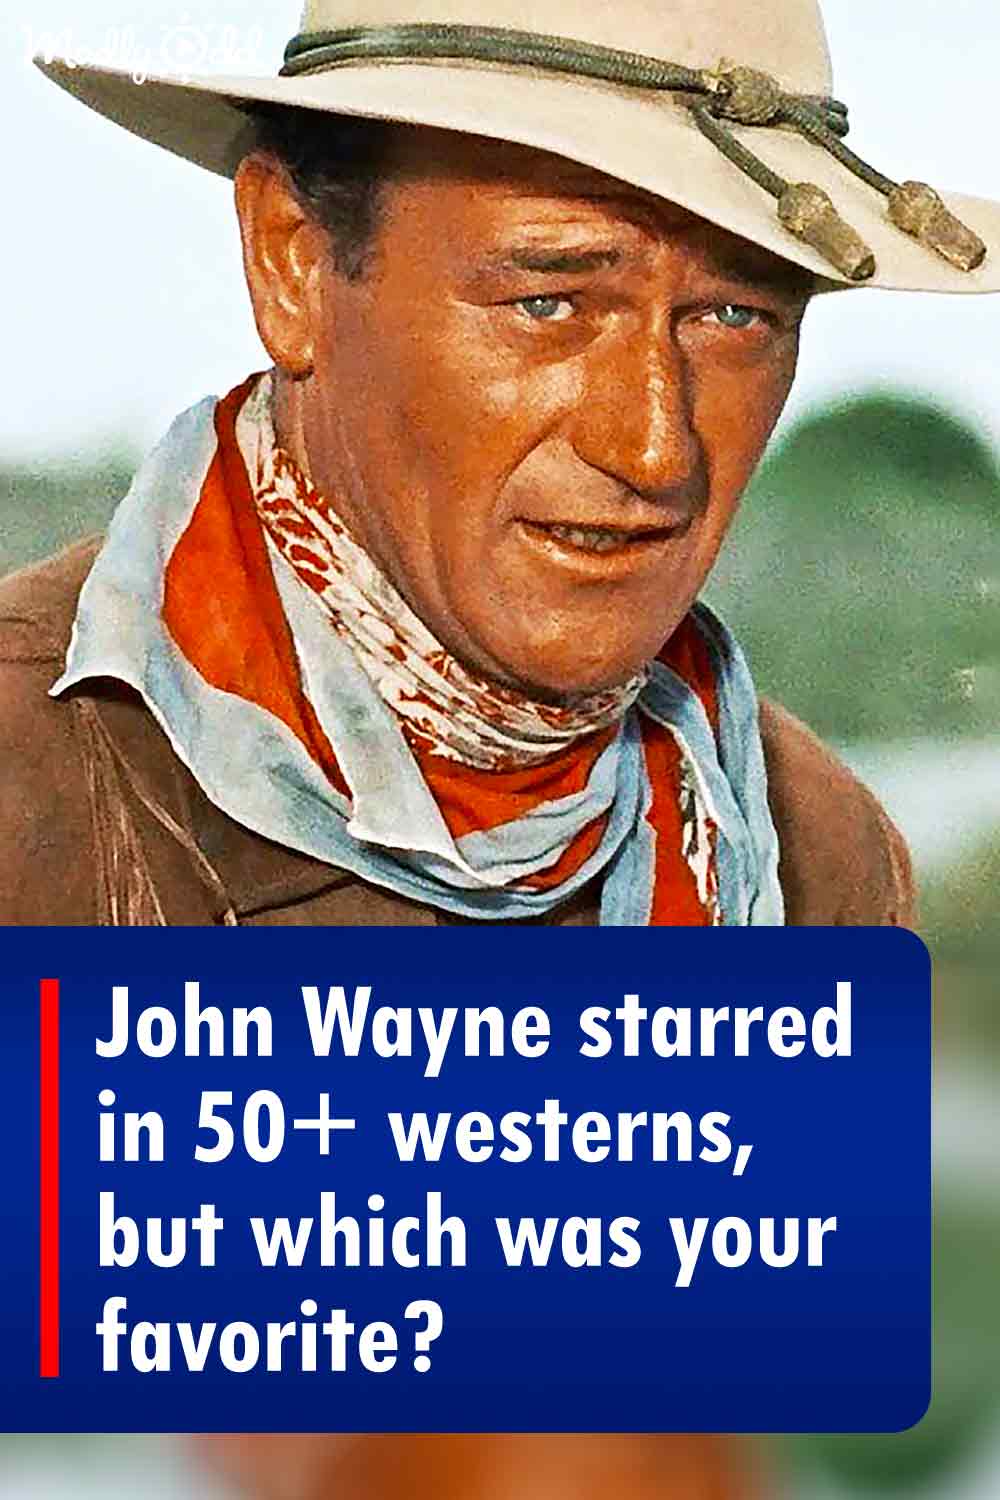 John Wayne starred in 50+ westerns, but which was your favorite?